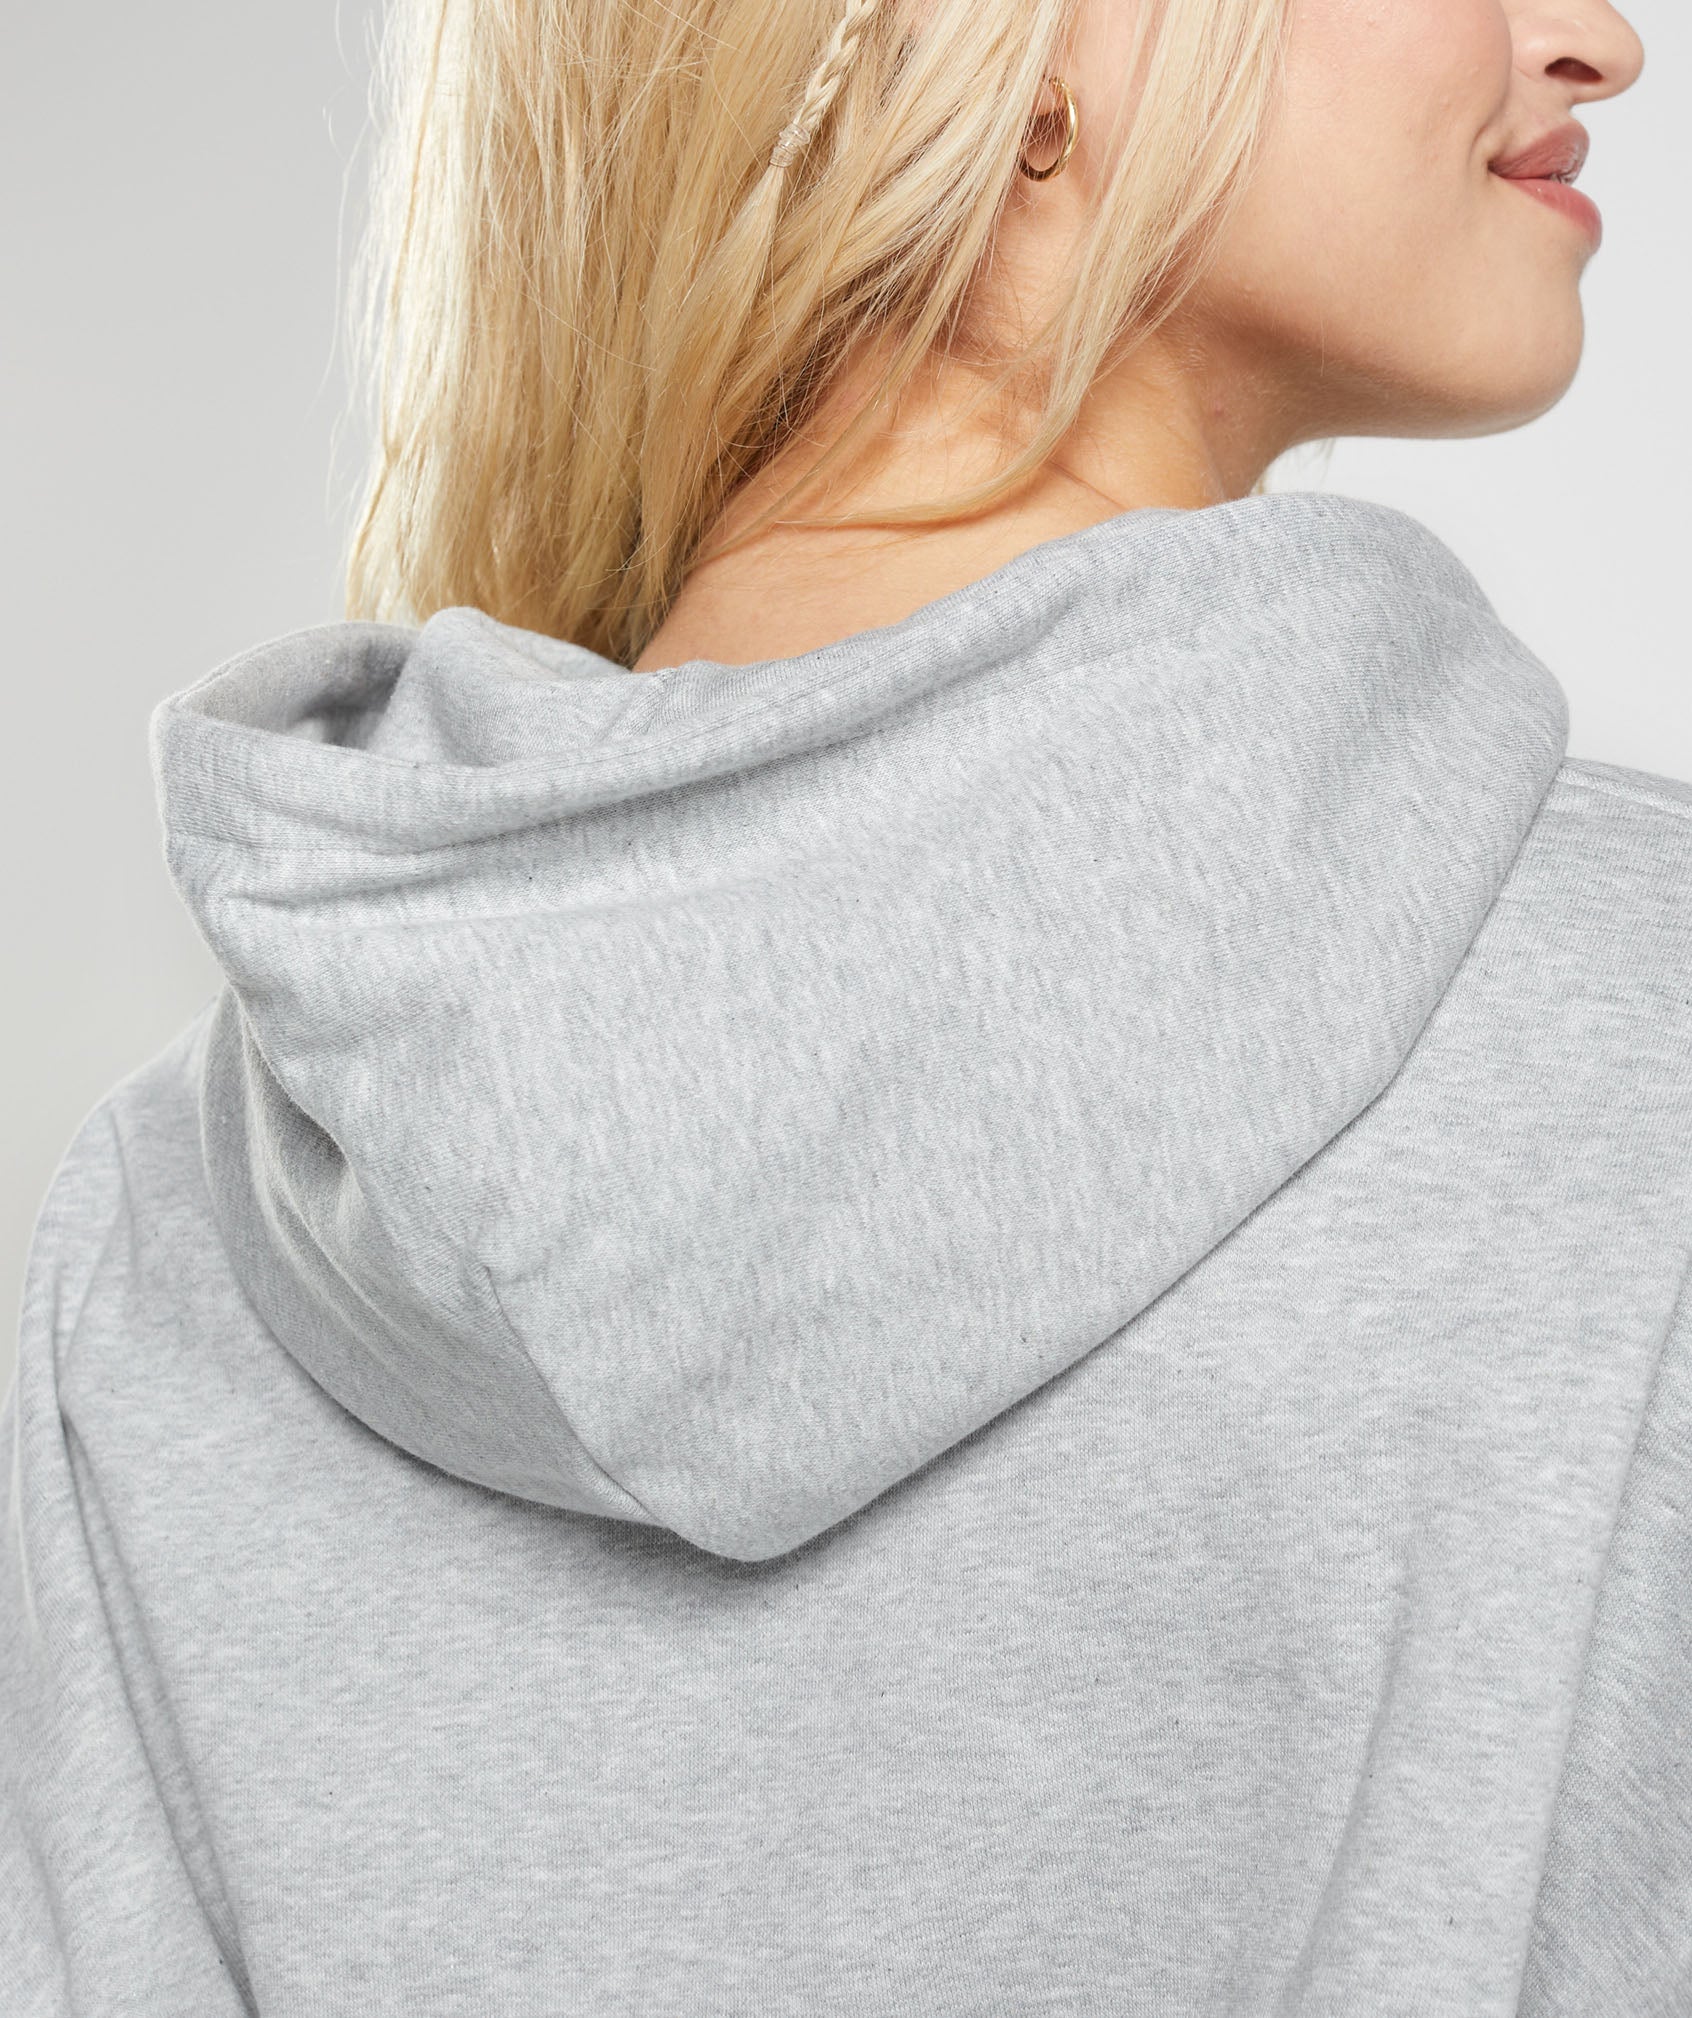 Maxed Out Hoodie in Light Grey Marl